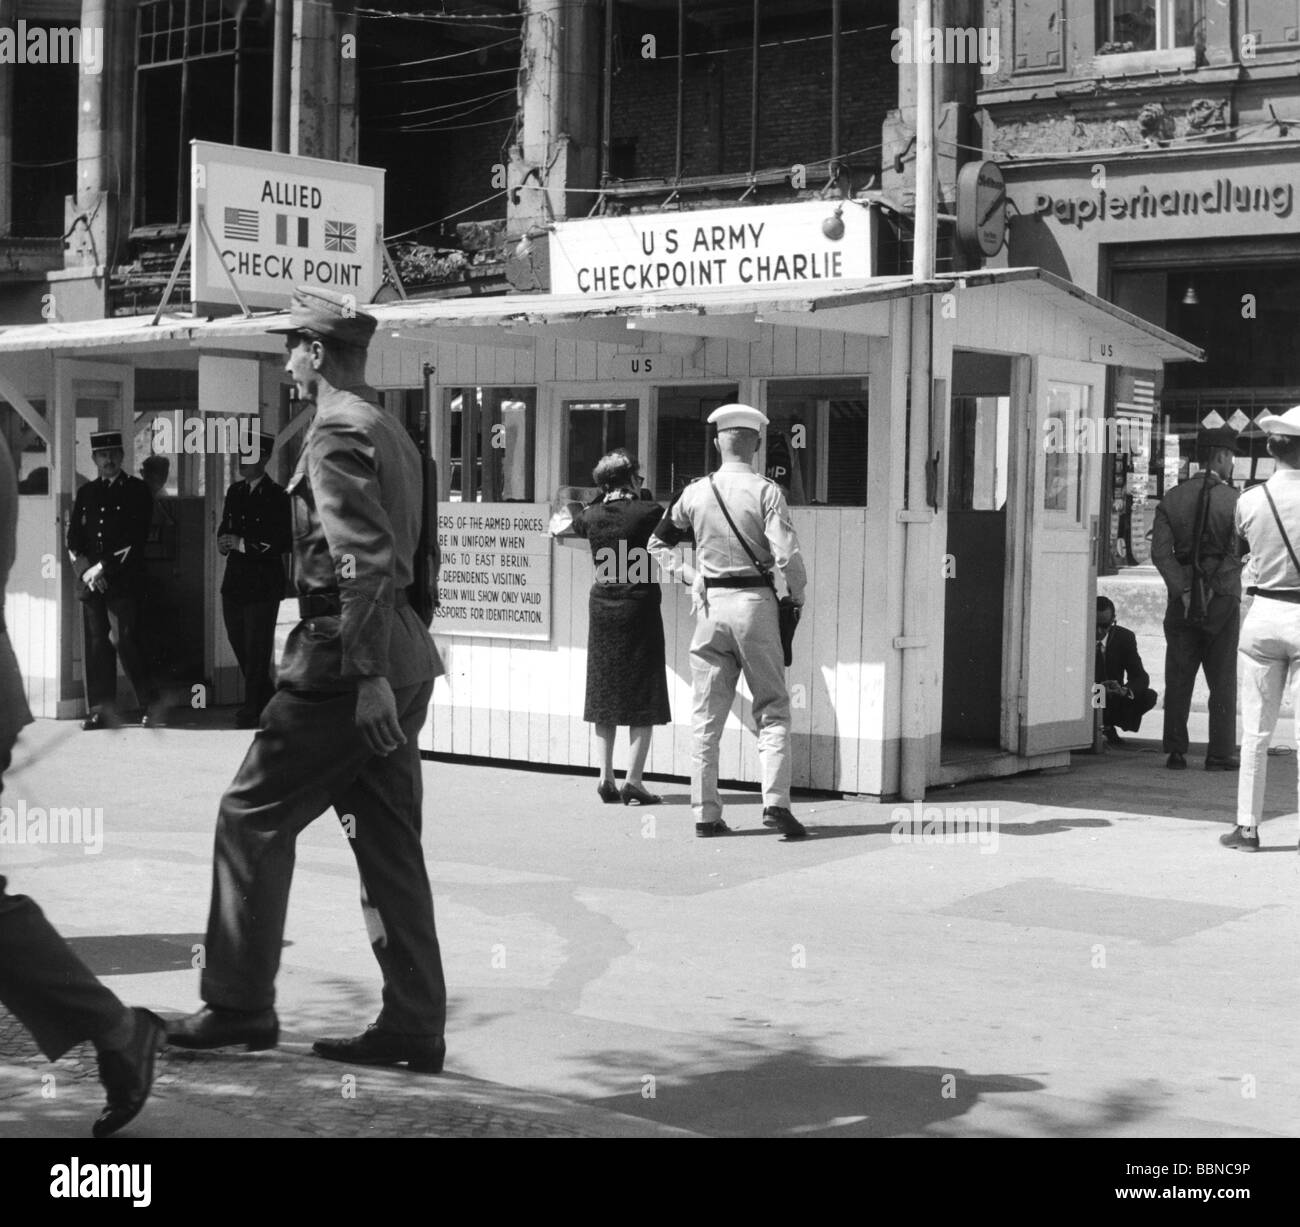 geography / travel, Germany, Berlin, wall, Checkpoint Charlie, border crossing for Allied personal, Friedrichstrasse, circa 1962, Stock Photo